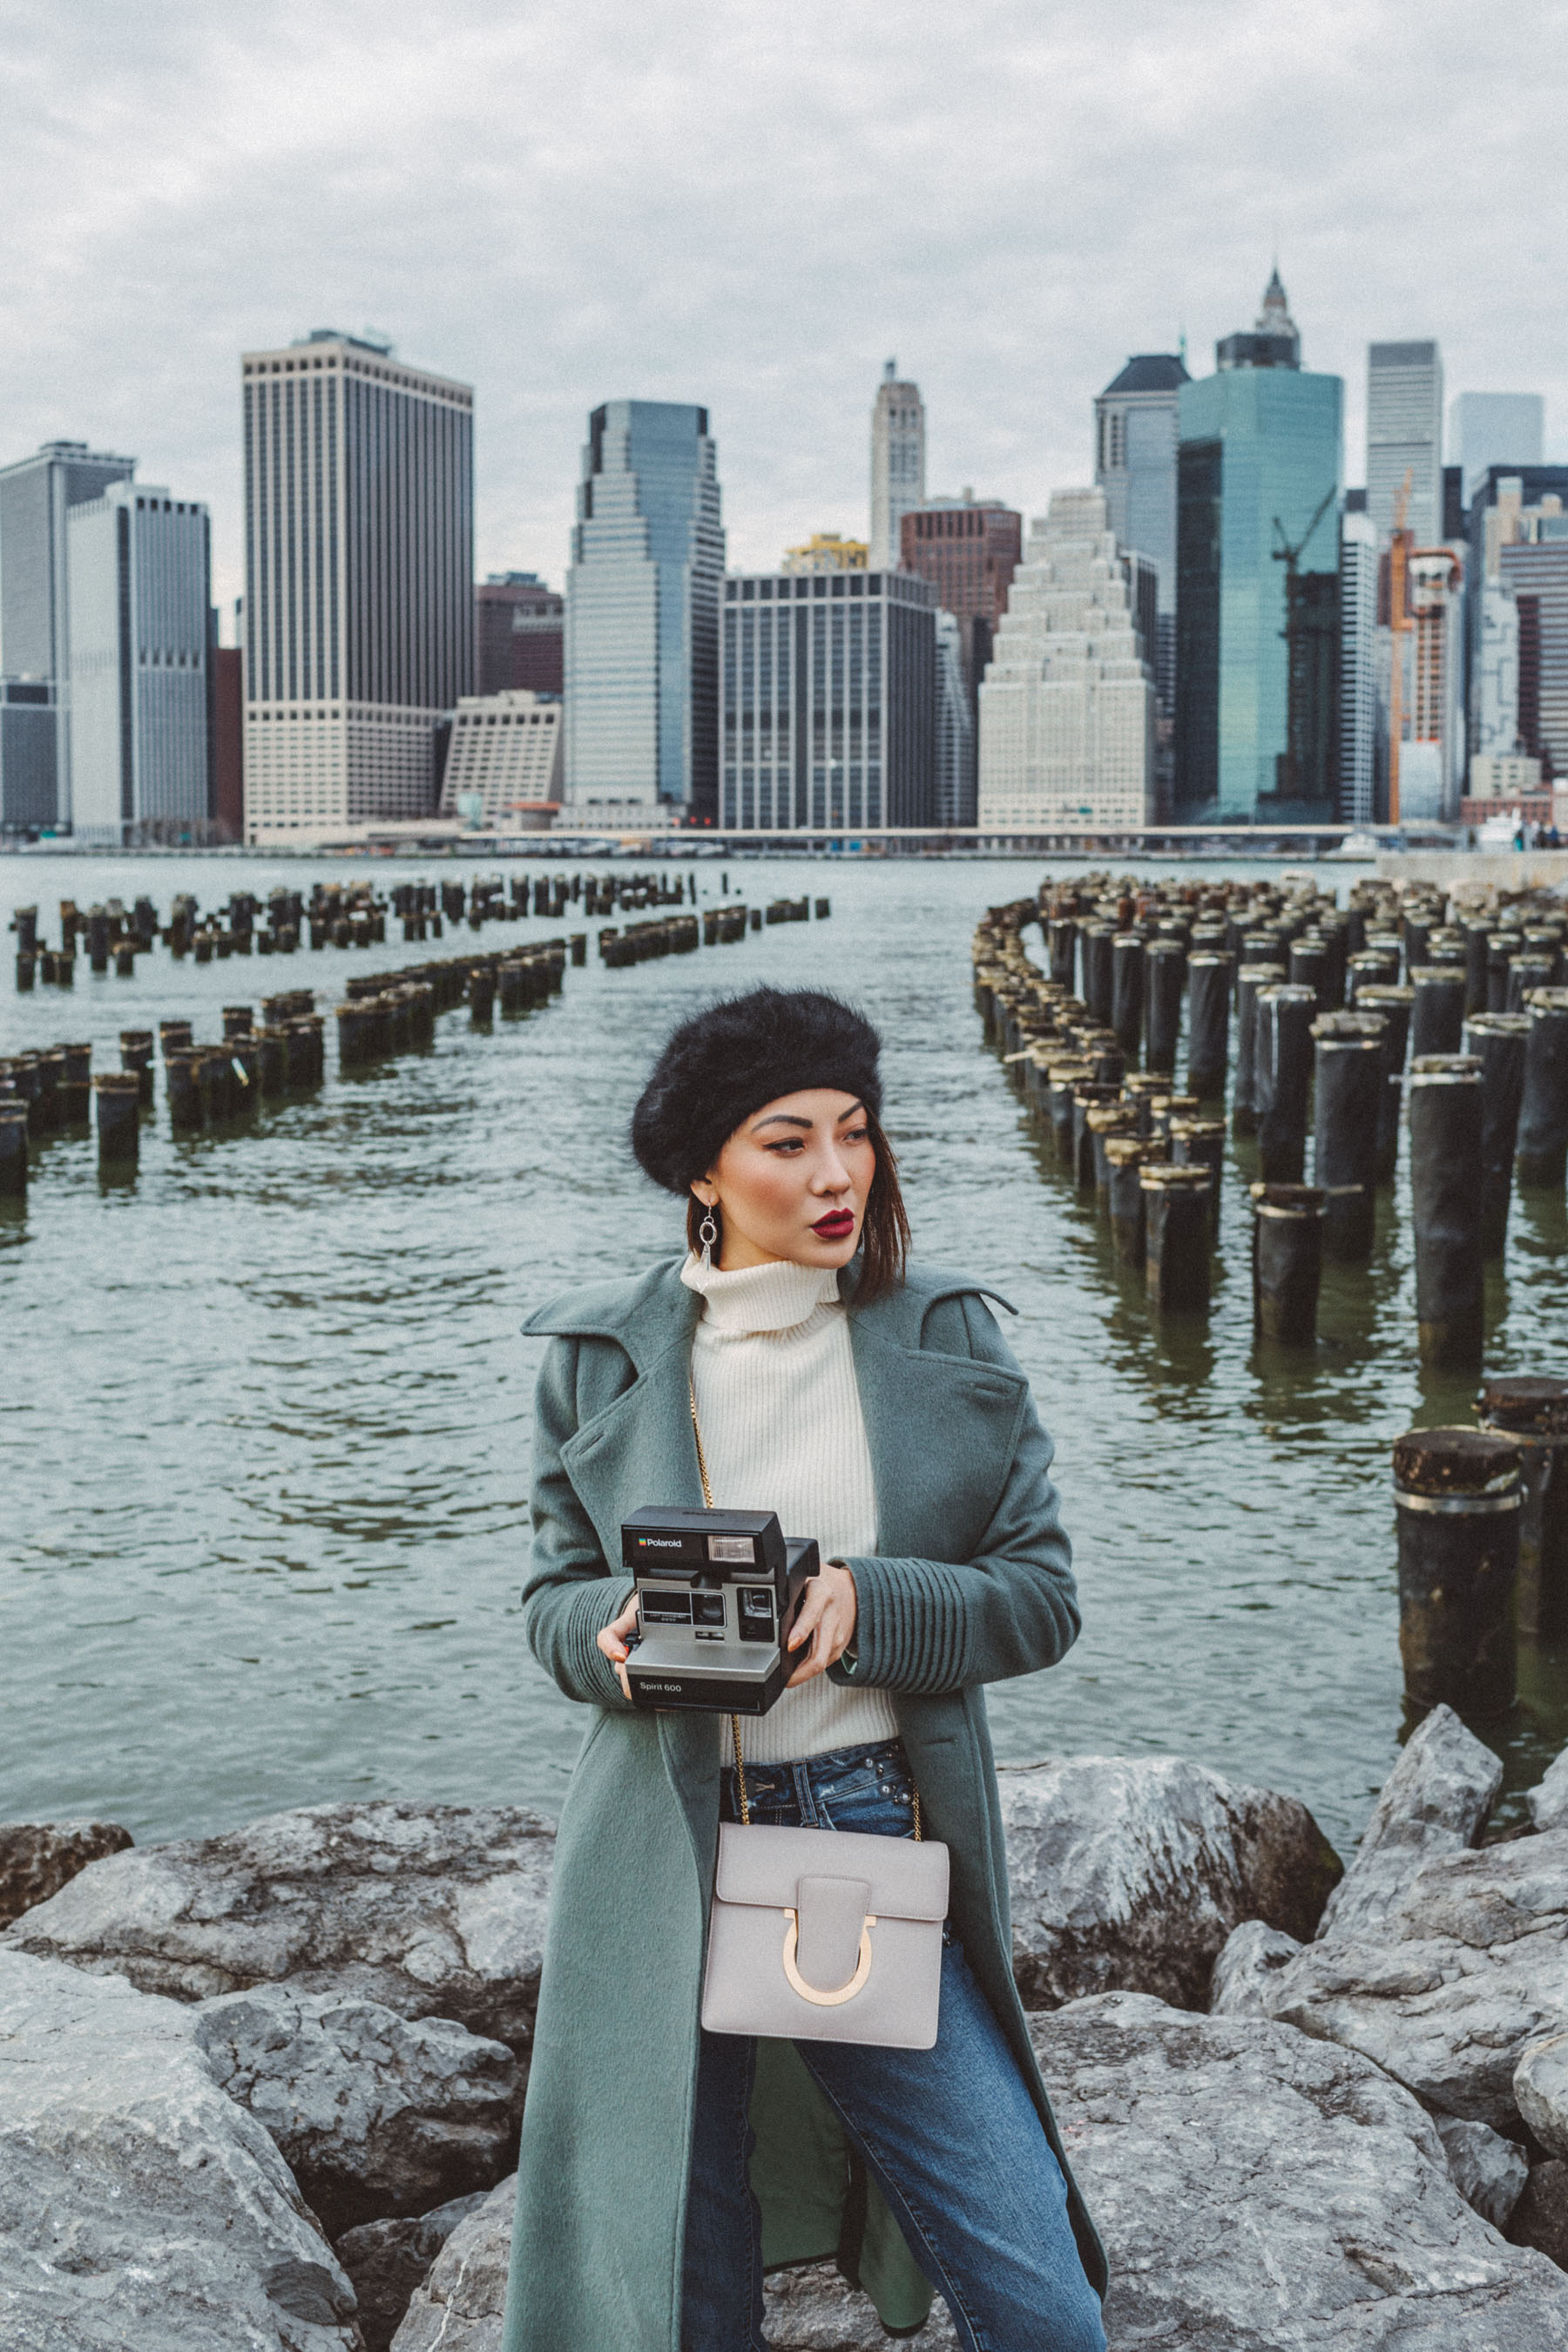 Instagram Outfits Round Up // Notjessfashion.com // Cozy Layered looks, jessica wang, fashion blogger, new york fashion blogger, street style fashion, ootd, asian blogger, parisian chic outfit, beret outfit, how to wear a beret, beret styling, chic winter style, new york fashion